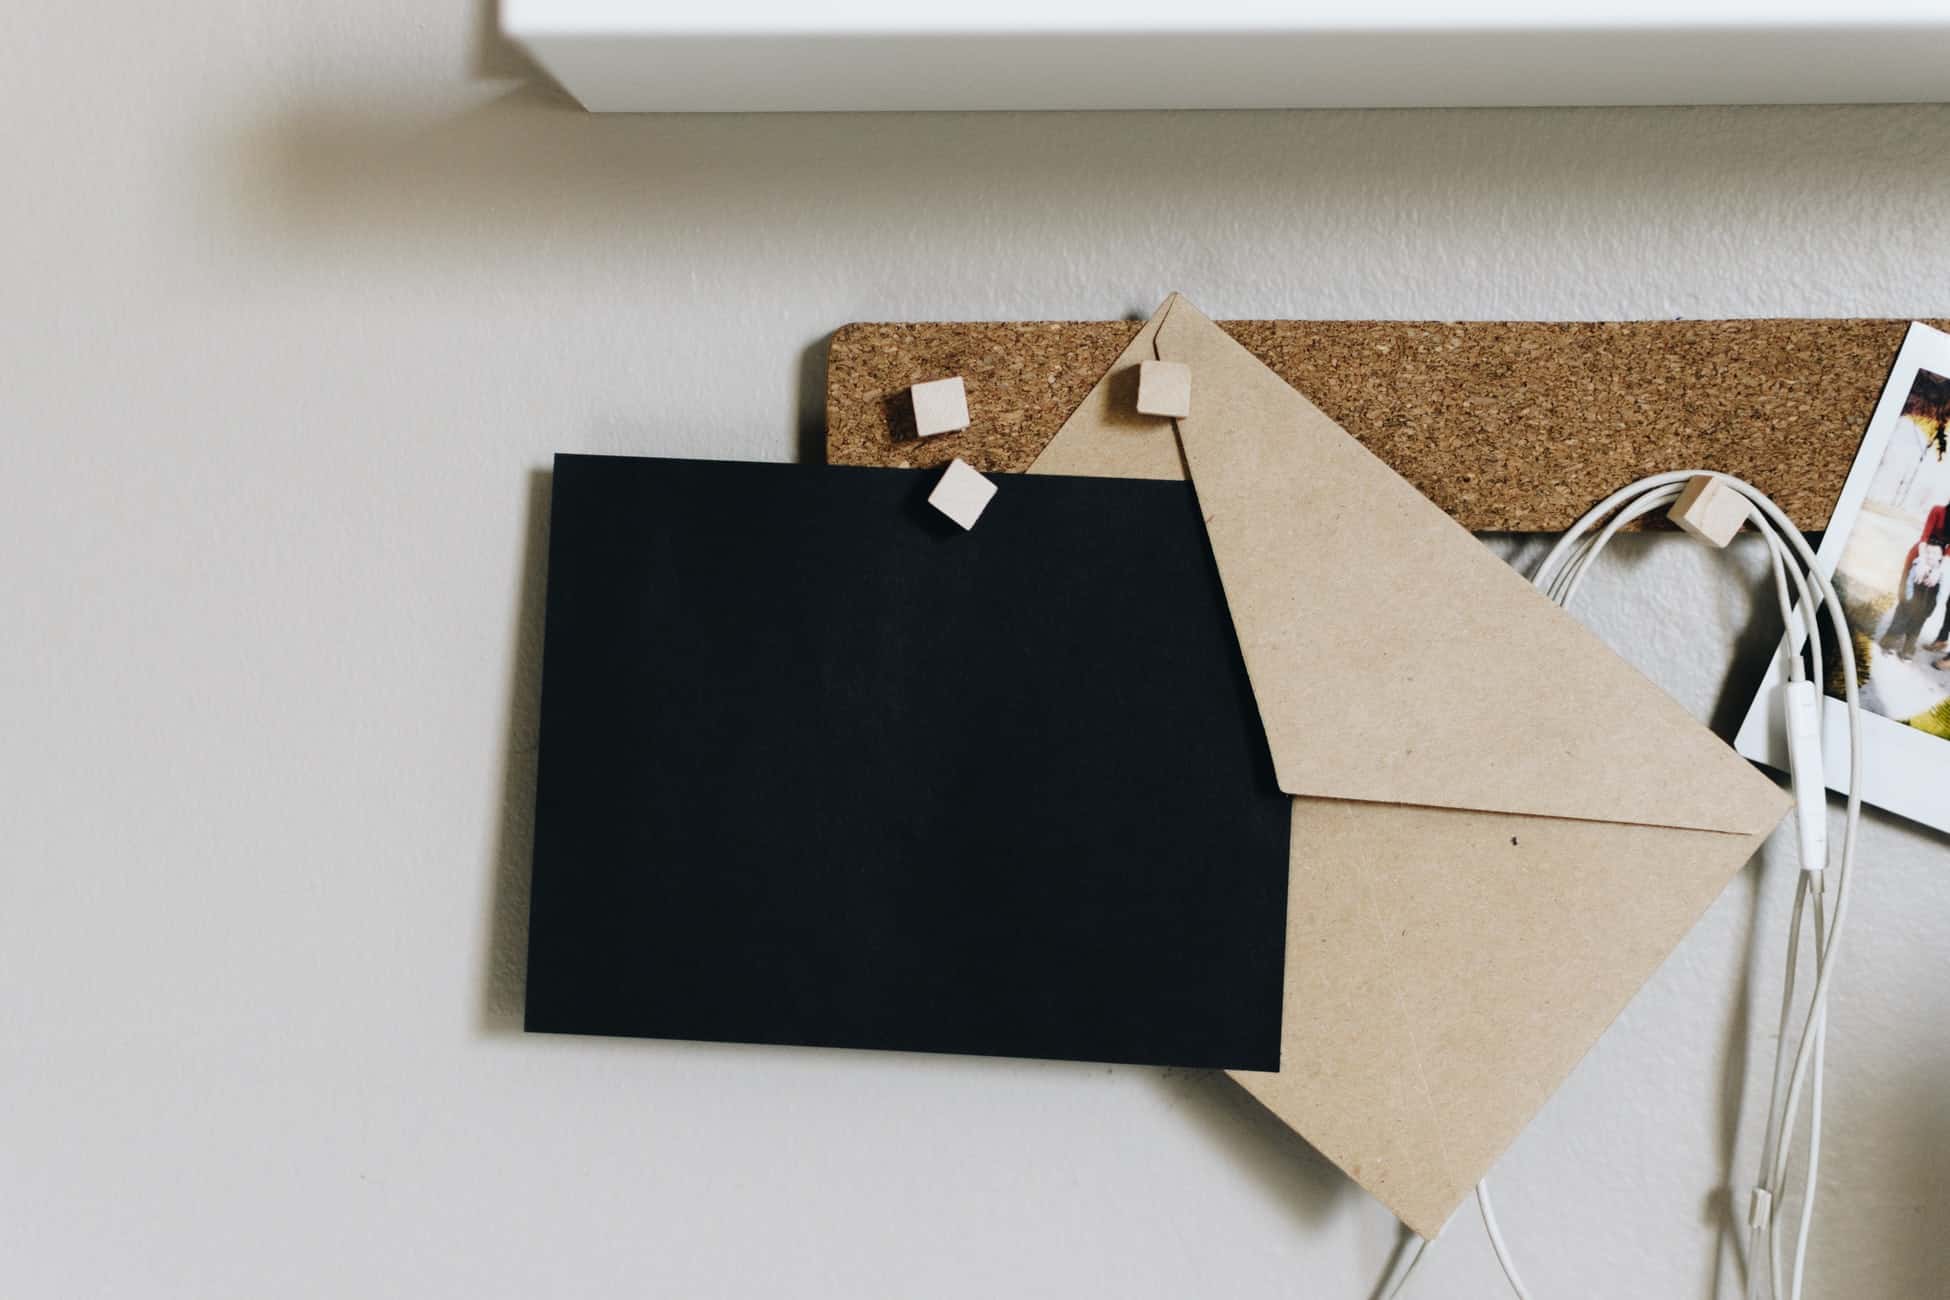 Cork board with envelopes and earphones on